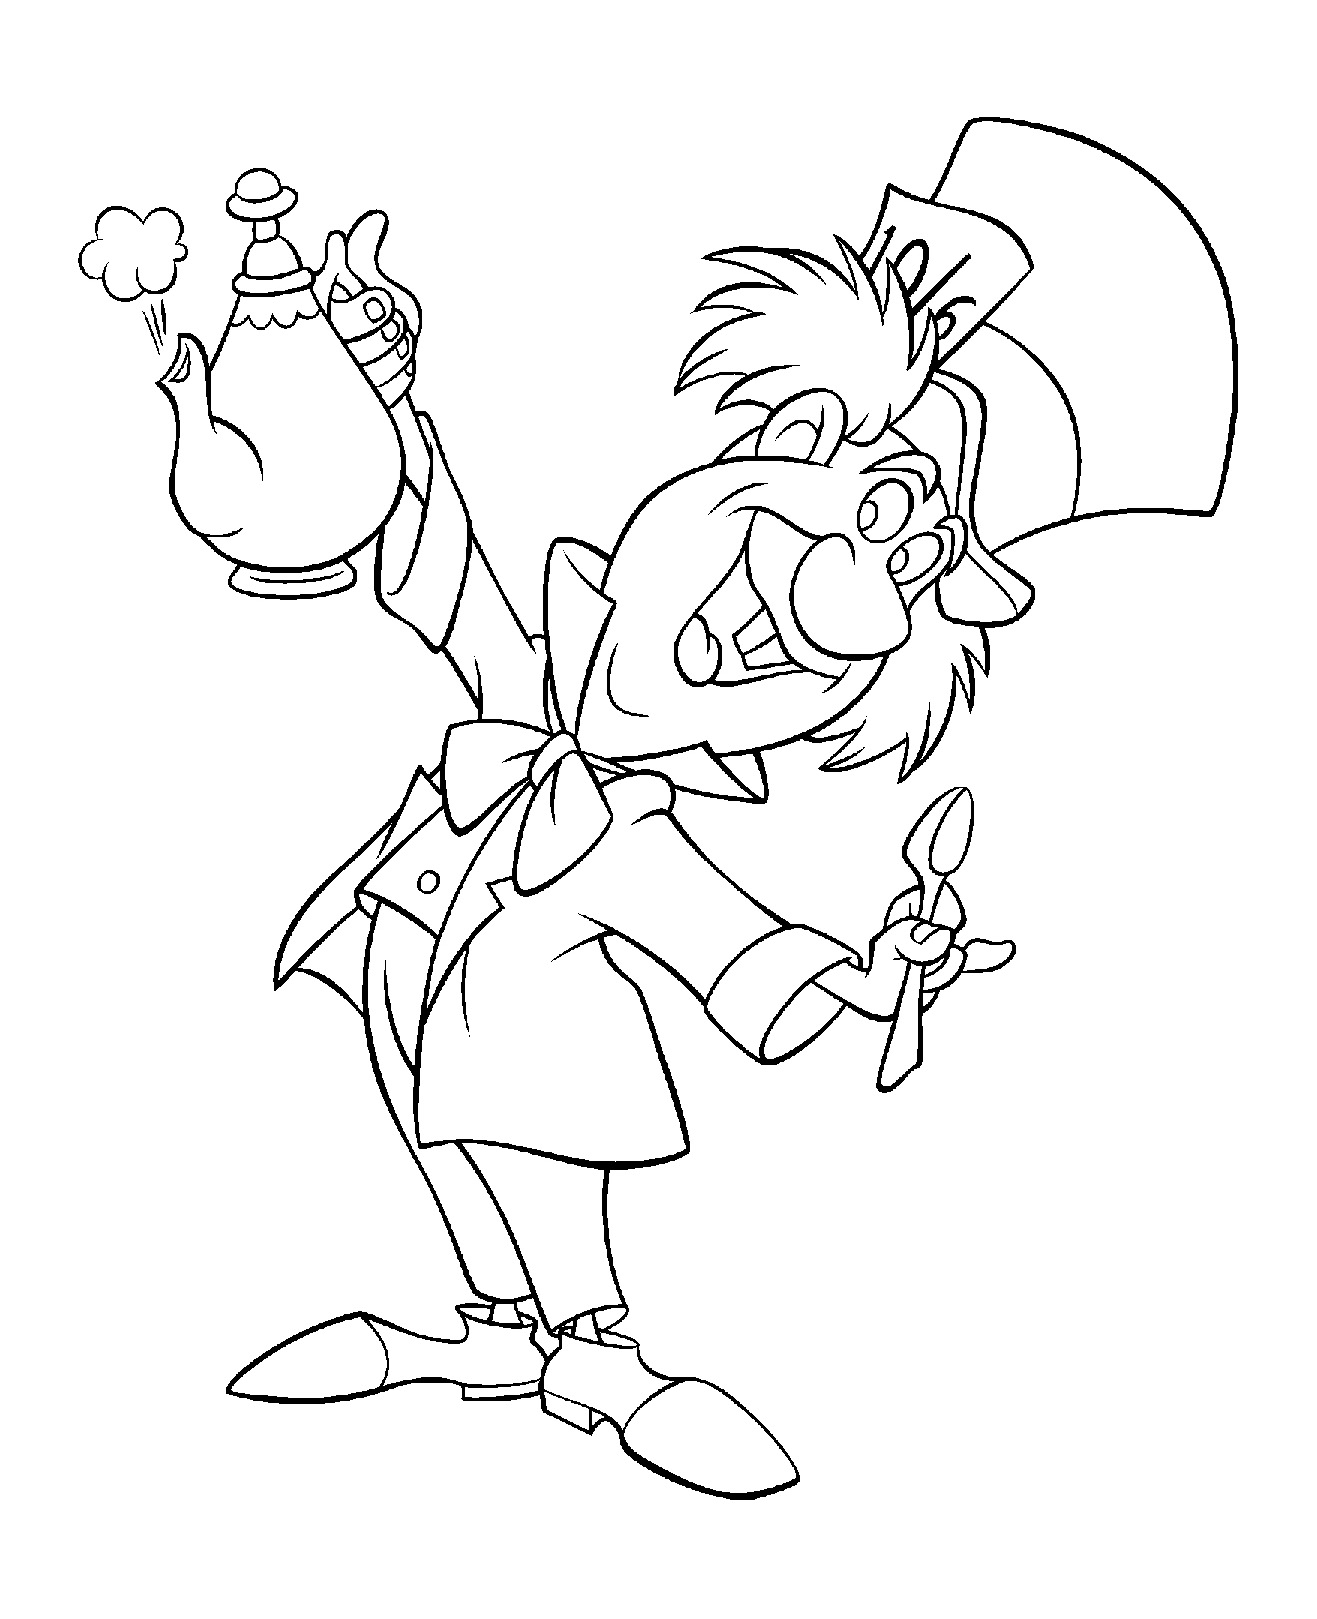 The mad hatter to color